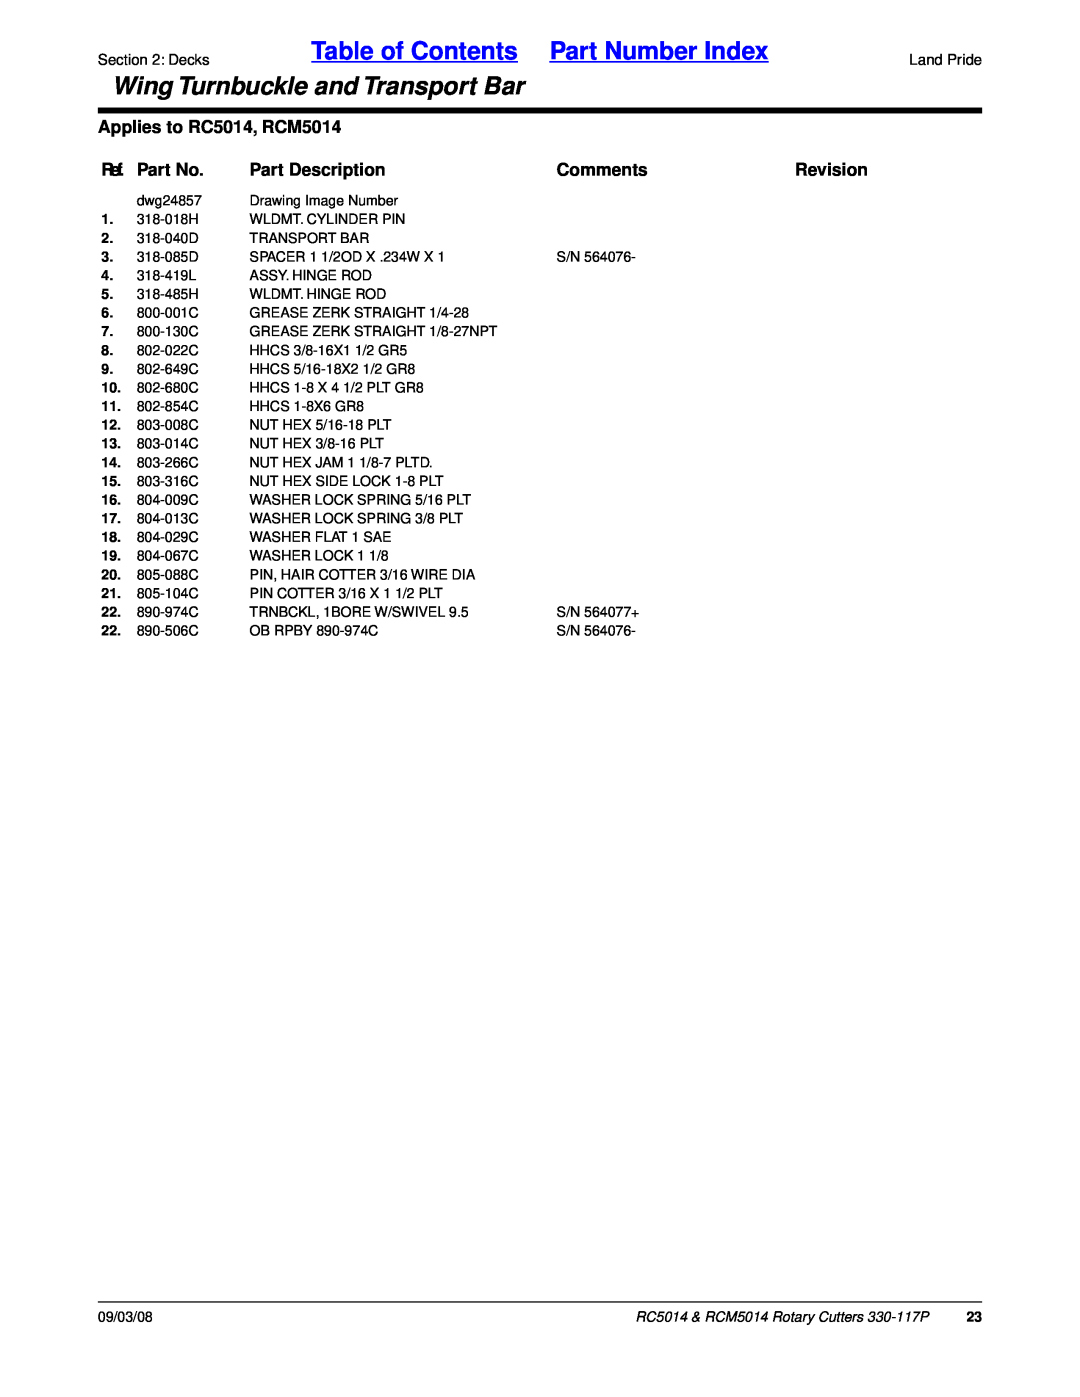 Land Pride Table of Contents Part Number Index, Wing Turnbuckle and Transport Bar, Applies to RC5014, RCM5014, Comments 